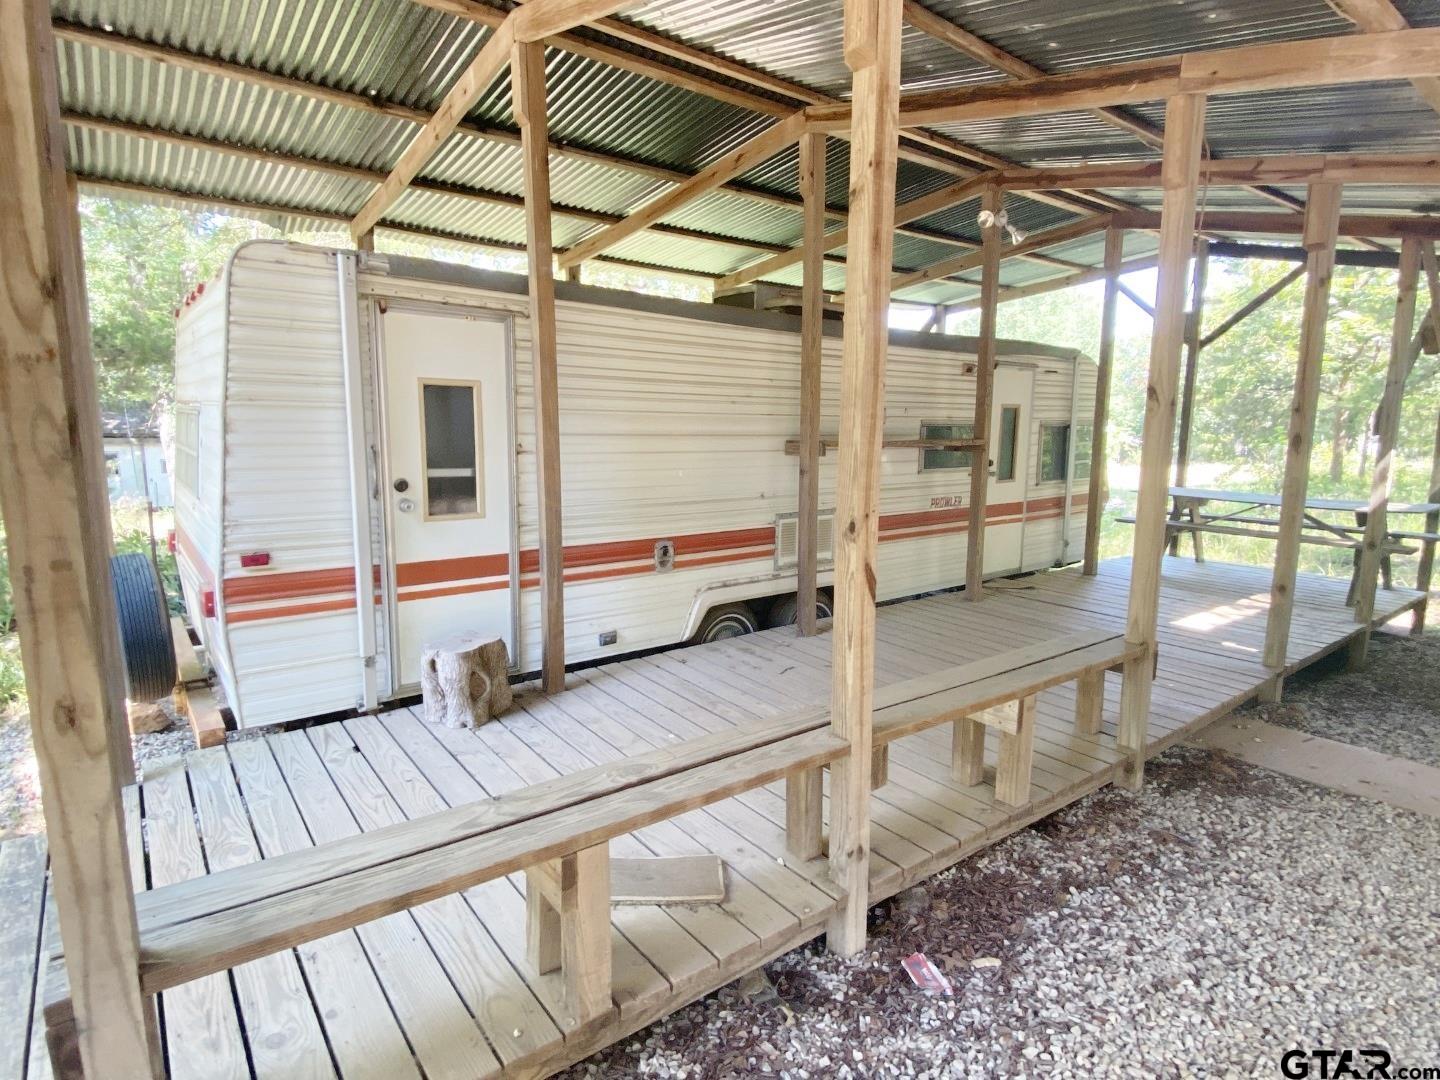 A covered wooden deck leads you up to a cozy Prowler camper with all living amenities inside.